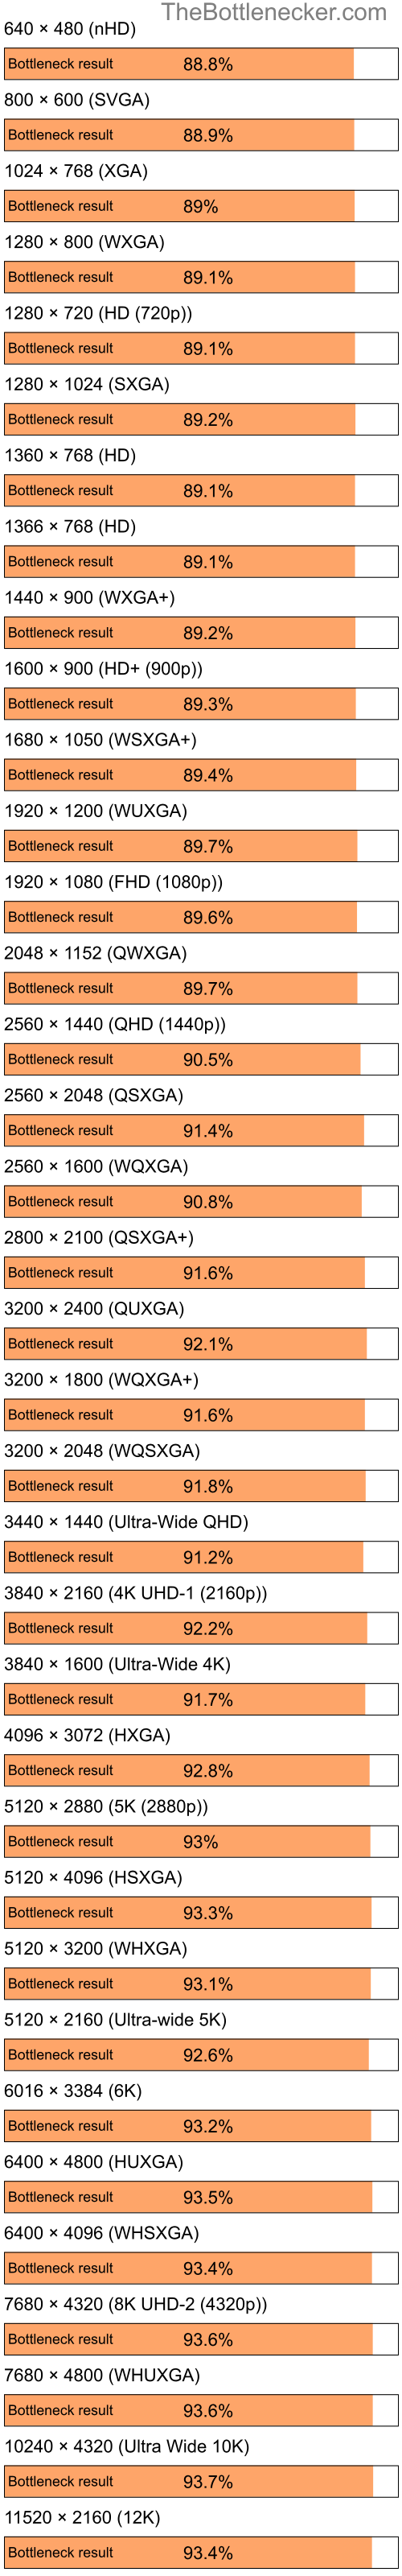 Bottleneck results by resolution for Intel Pentium 4 and NVIDIA GeForce4 Ti 4600 in General Tasks